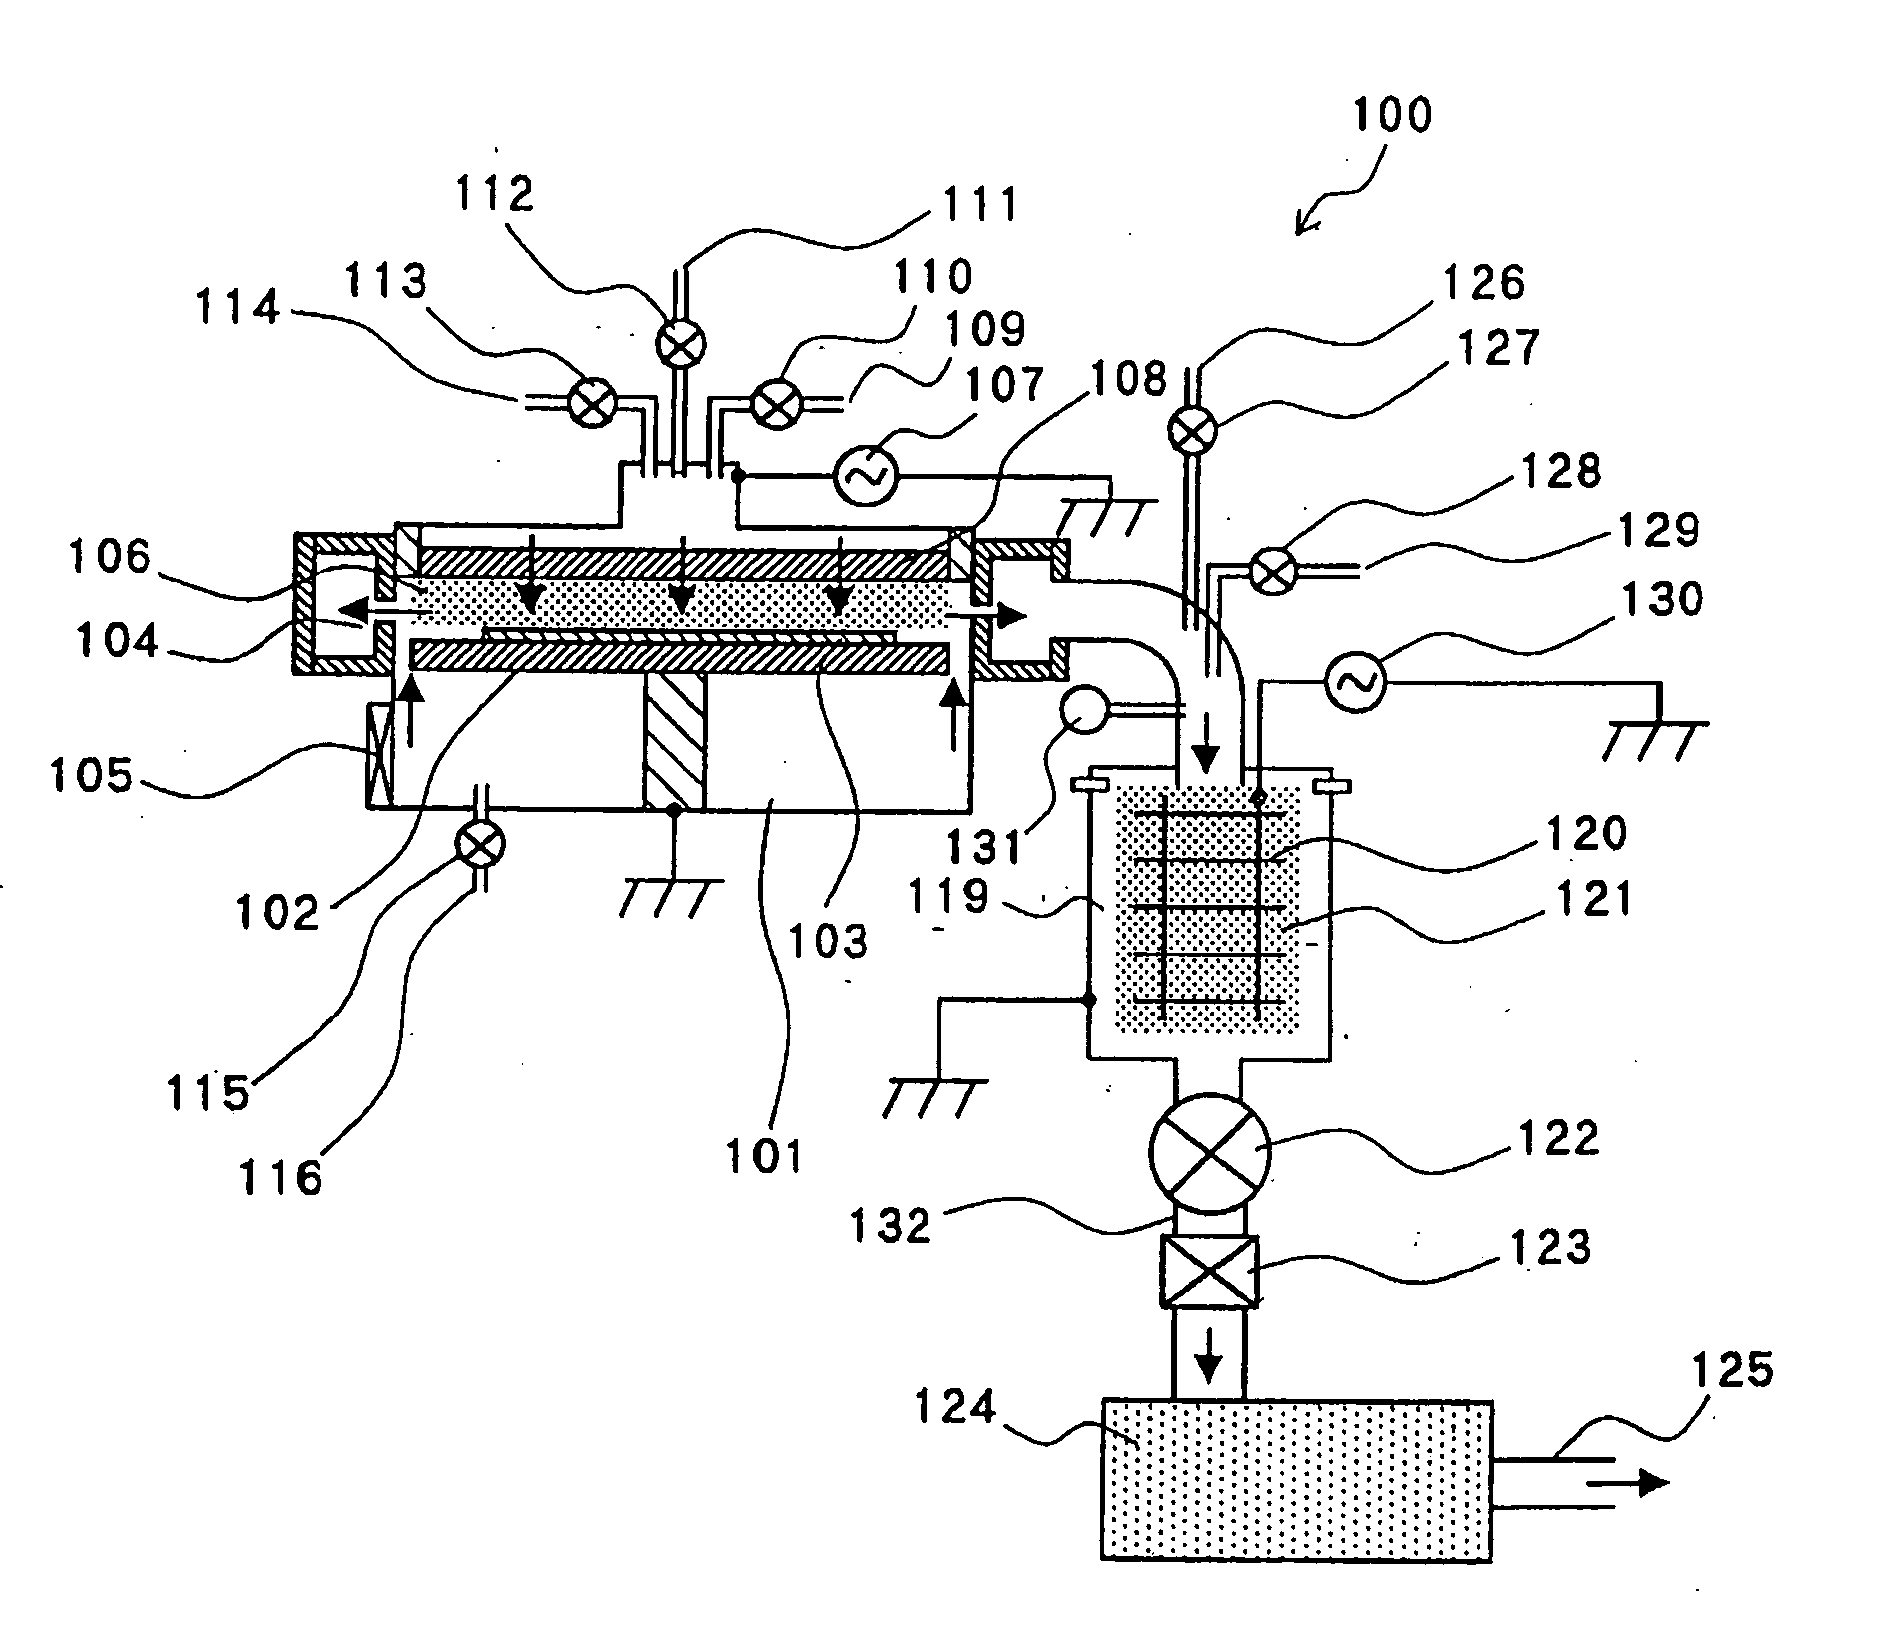 Plasma processing apparatus for forming film containing carbons on object to be deposited